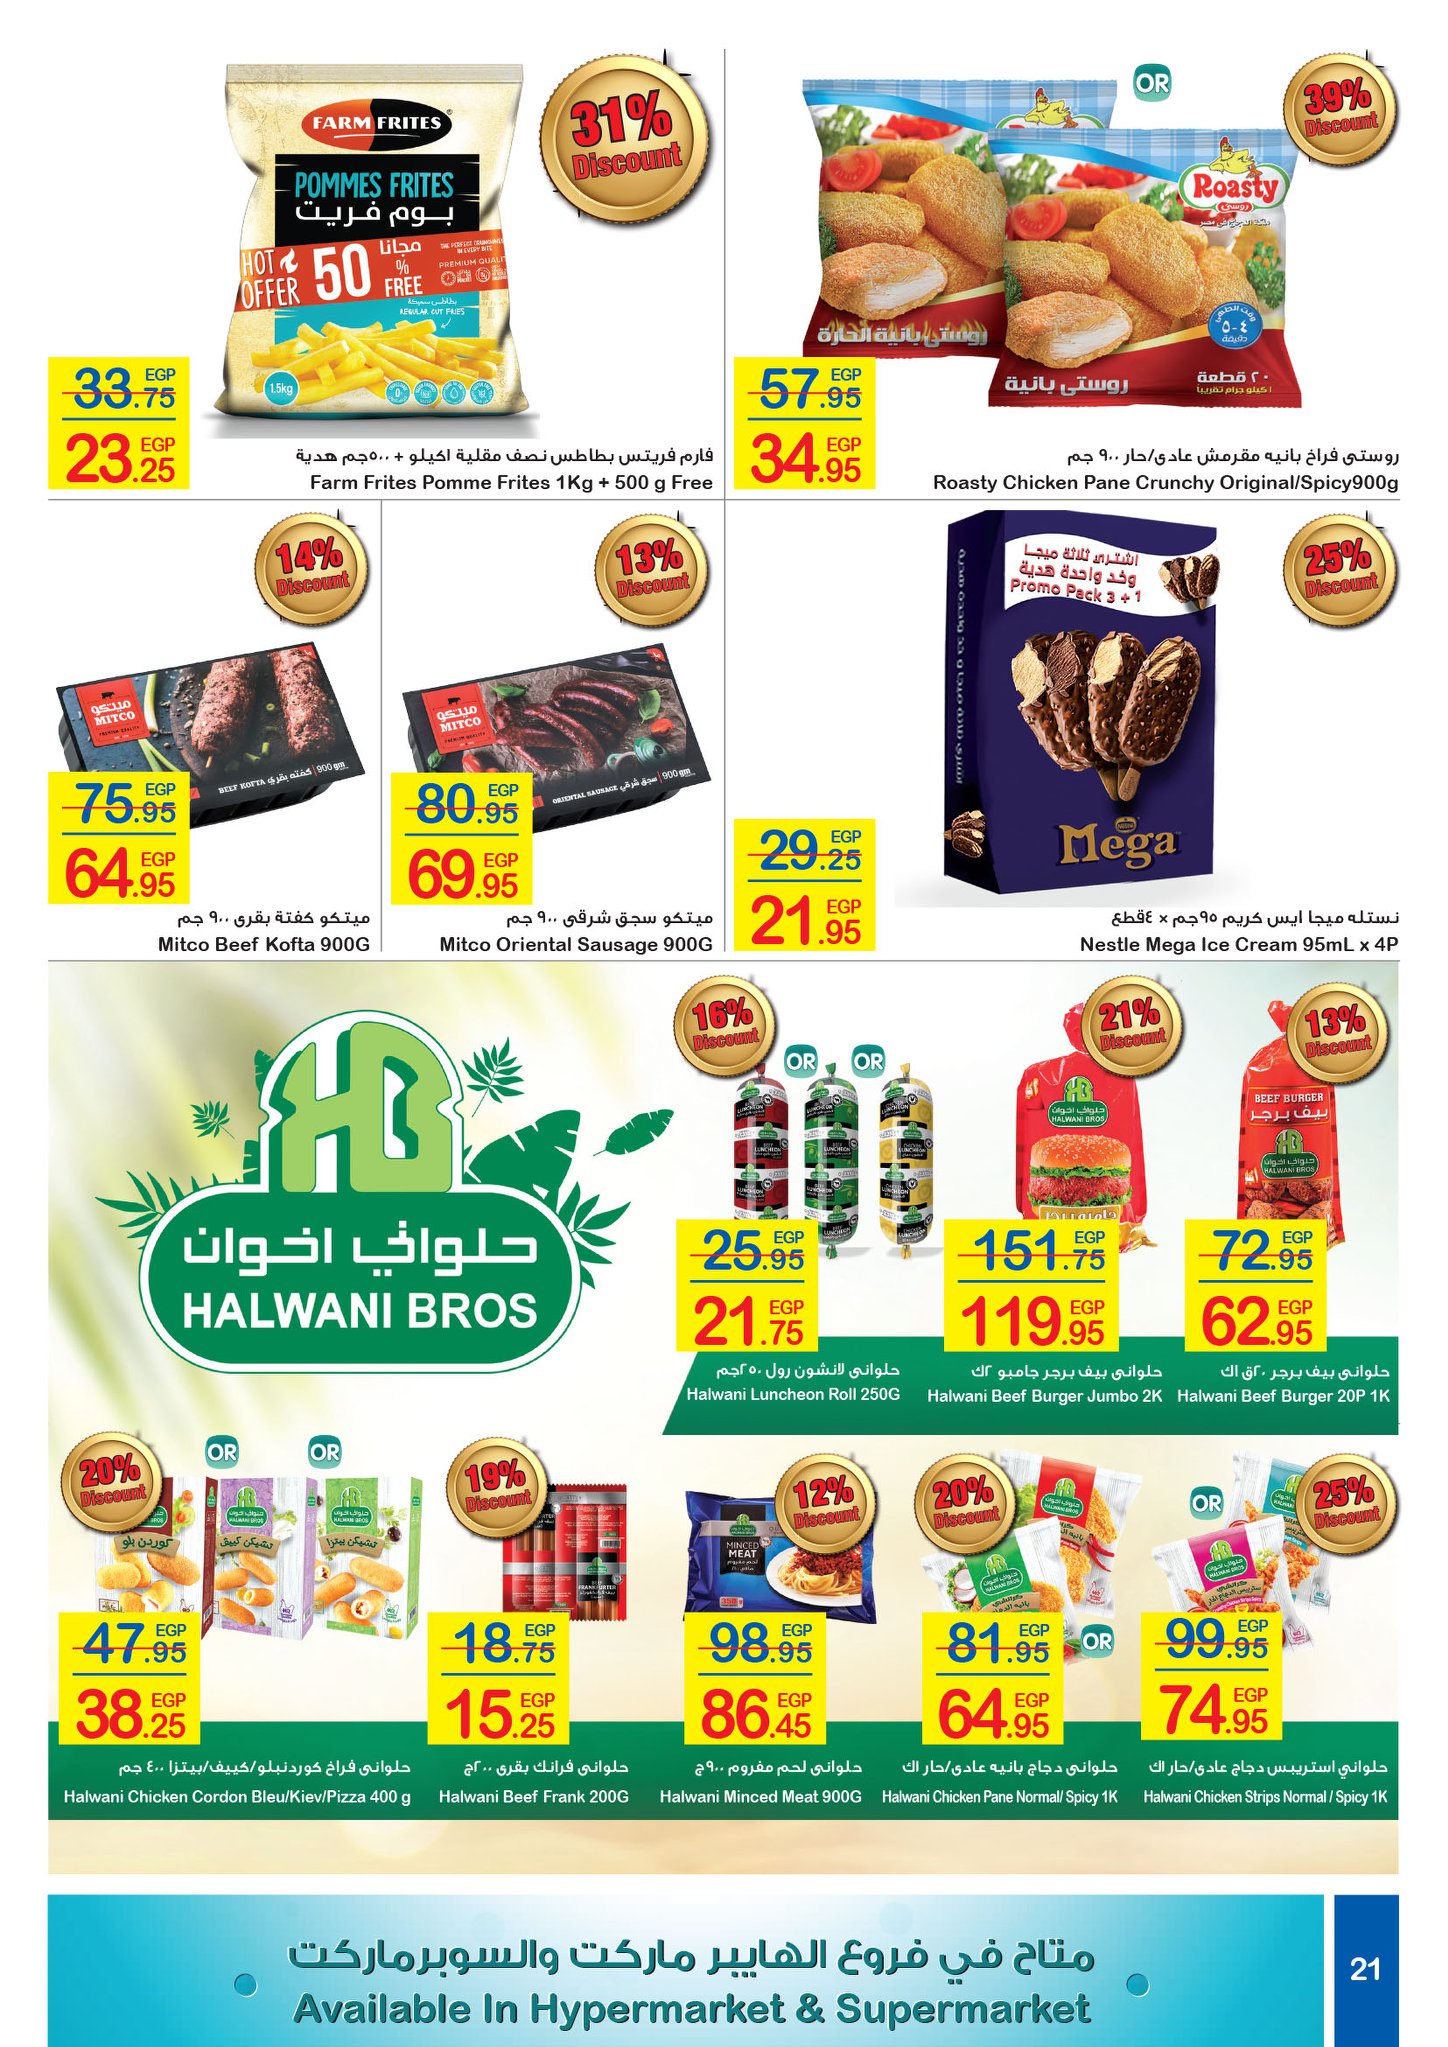 Carrefour Flyer from 16/7 till 27/7 | Carrefour Egypt 21